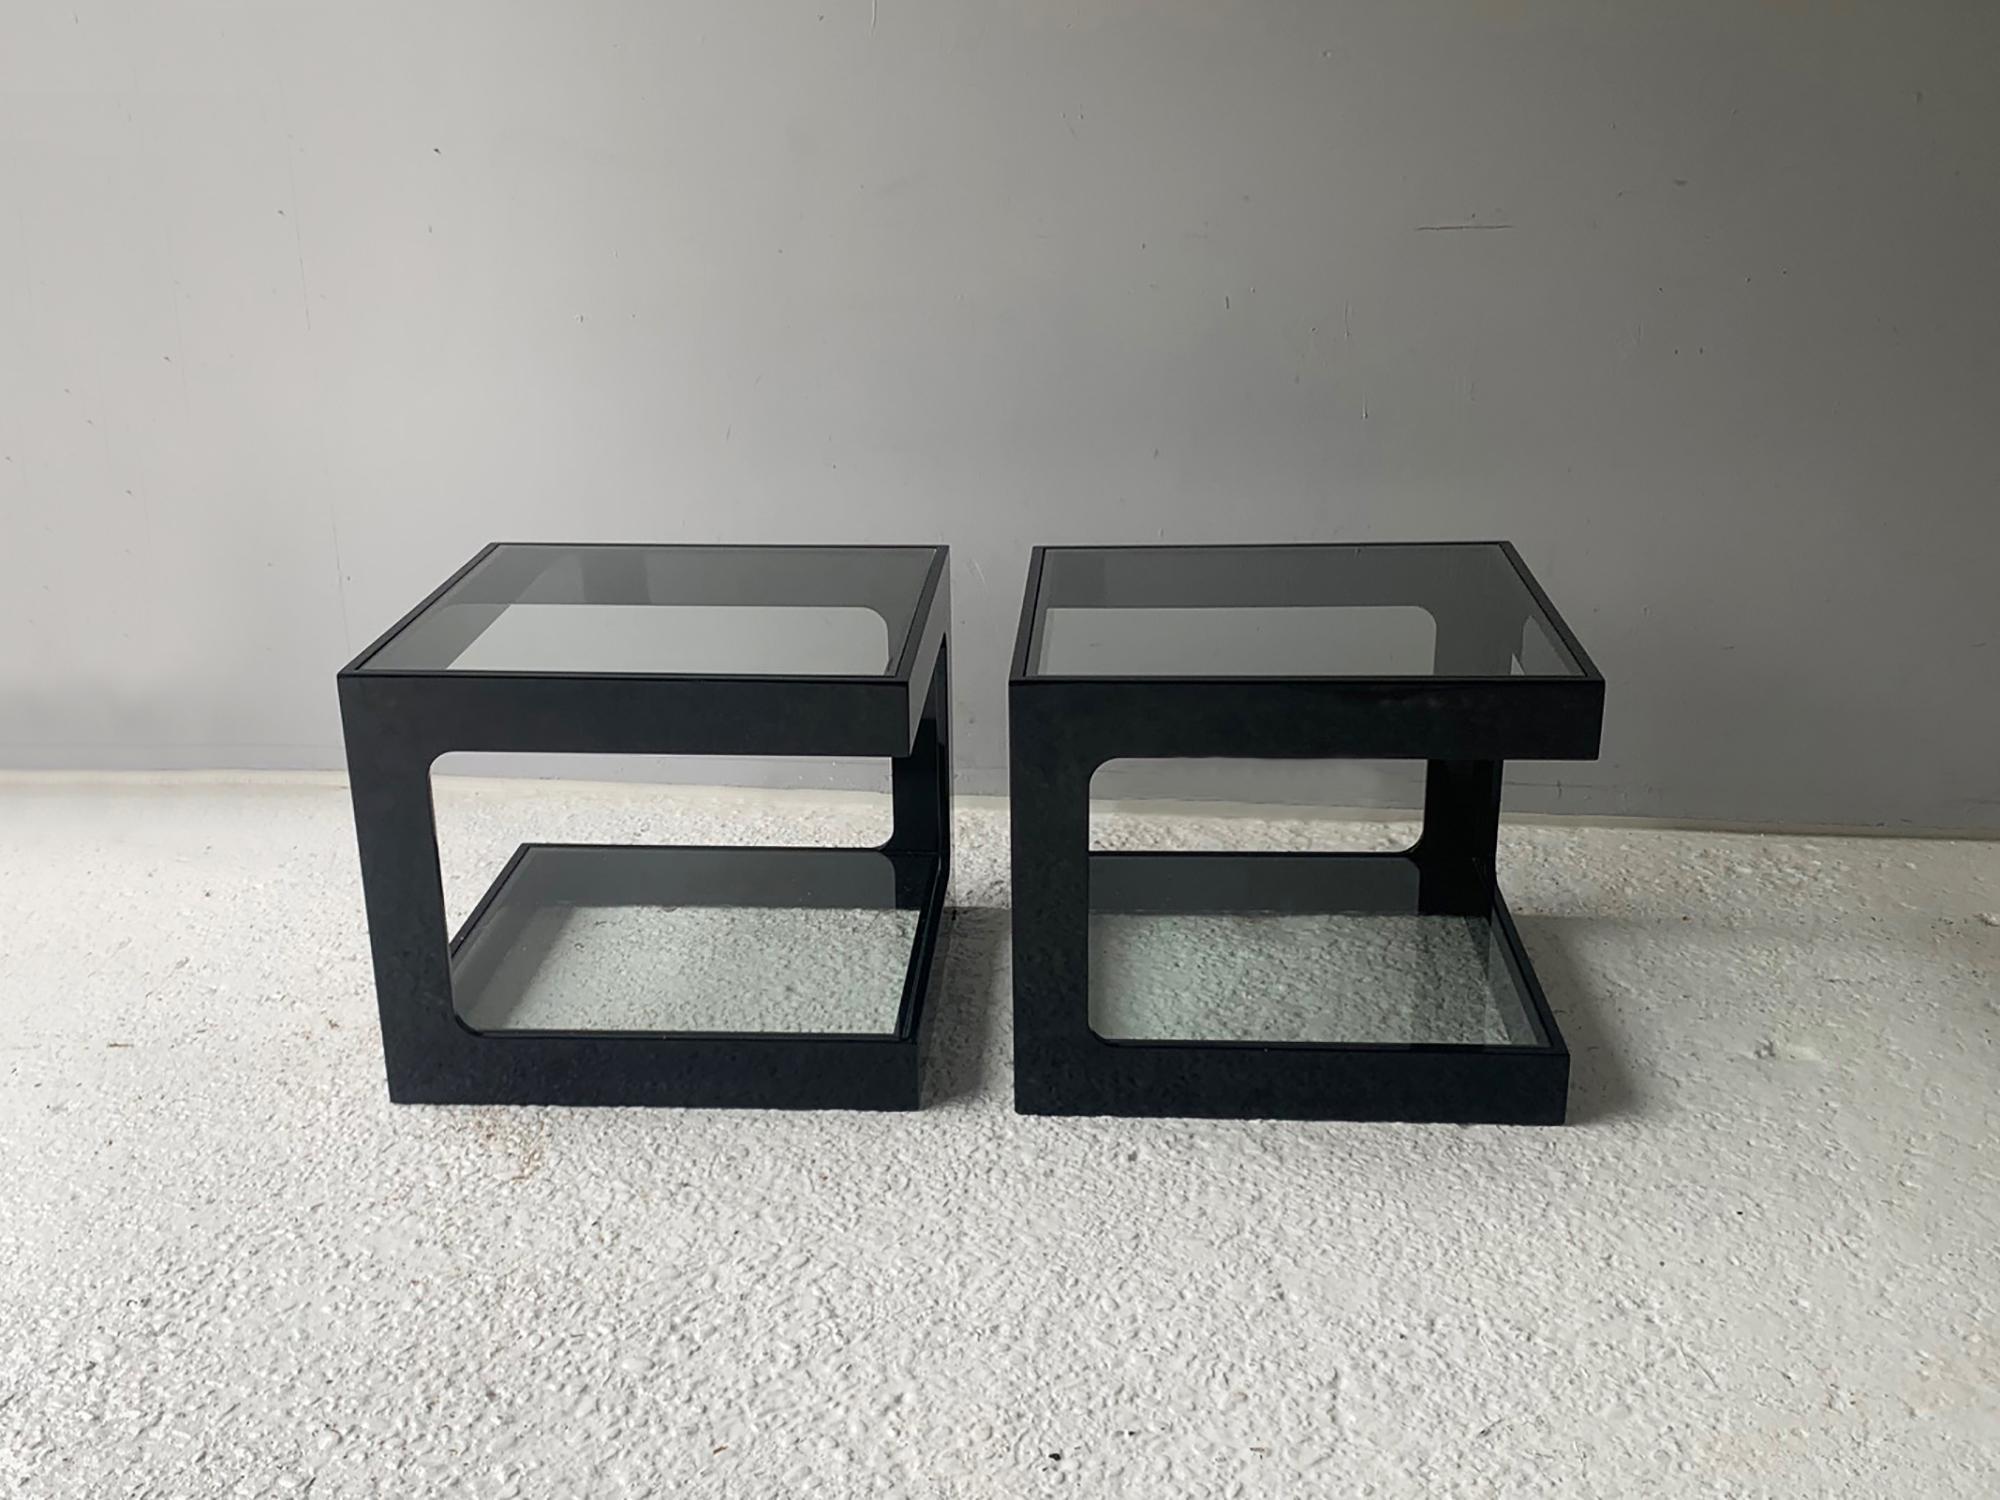 Pair of French Midcentury 1970s Plastic/Glass Coffee Tables/Bedside Tables In Excellent Condition For Sale In London, GB